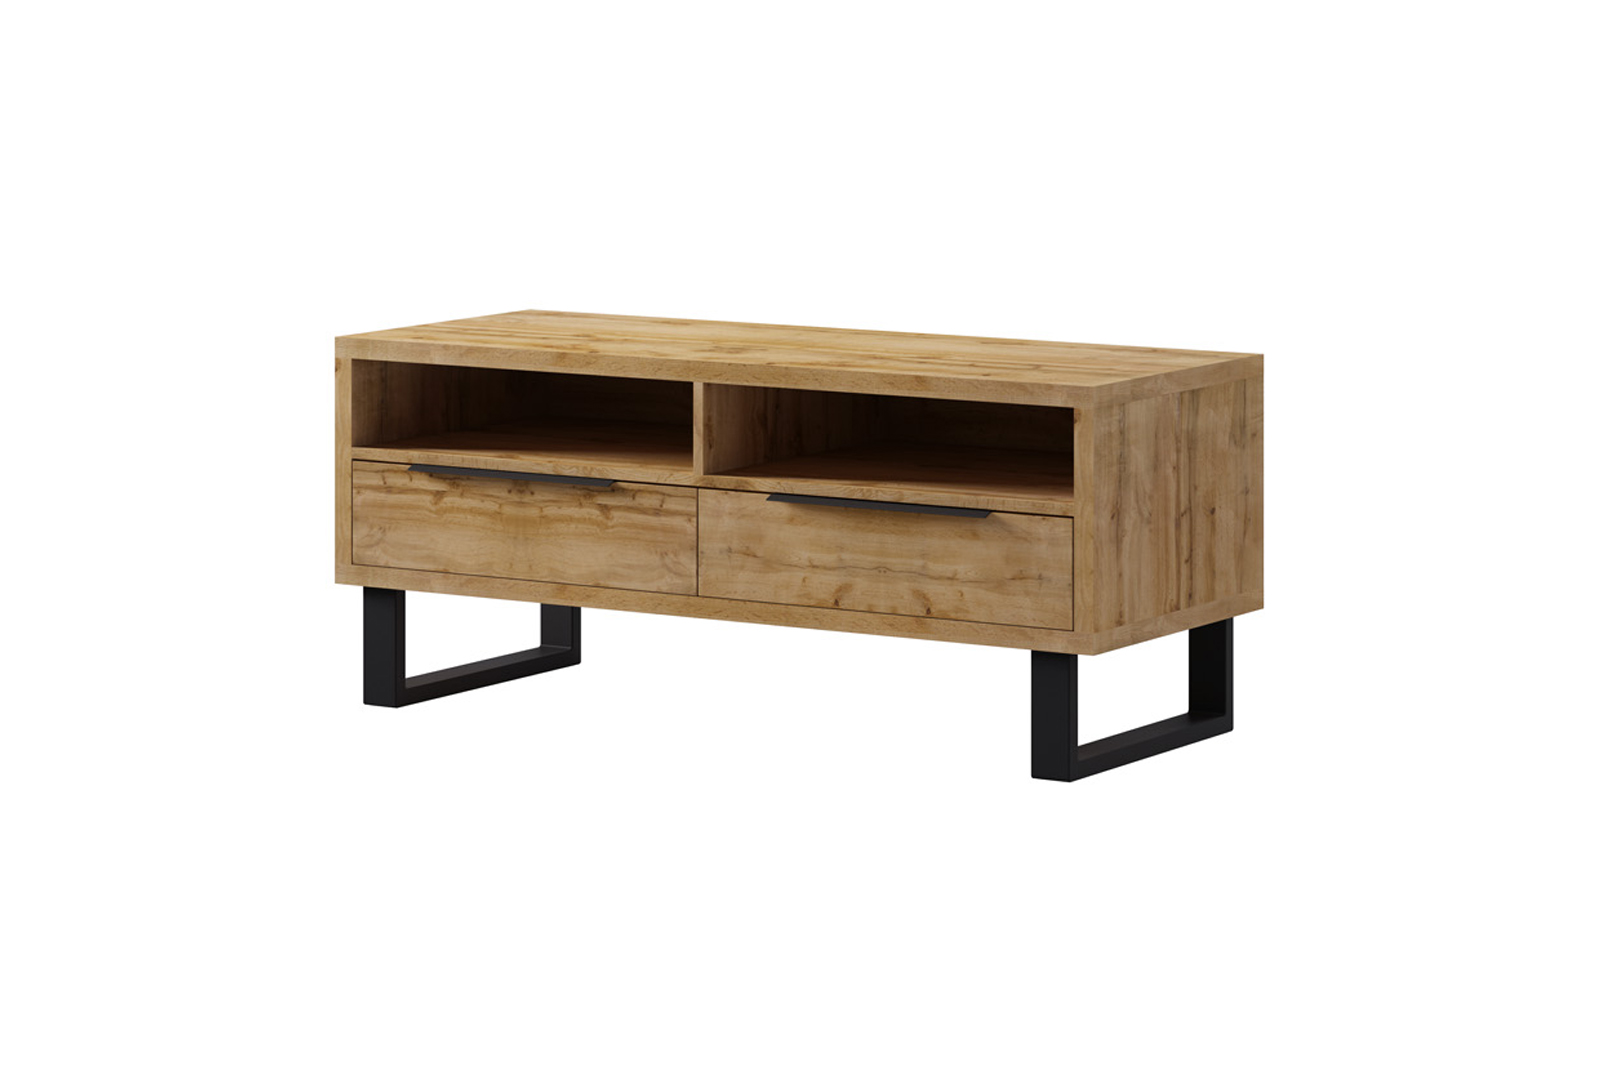 HALLE TV CHEST OF DRAWERS TYPE 41